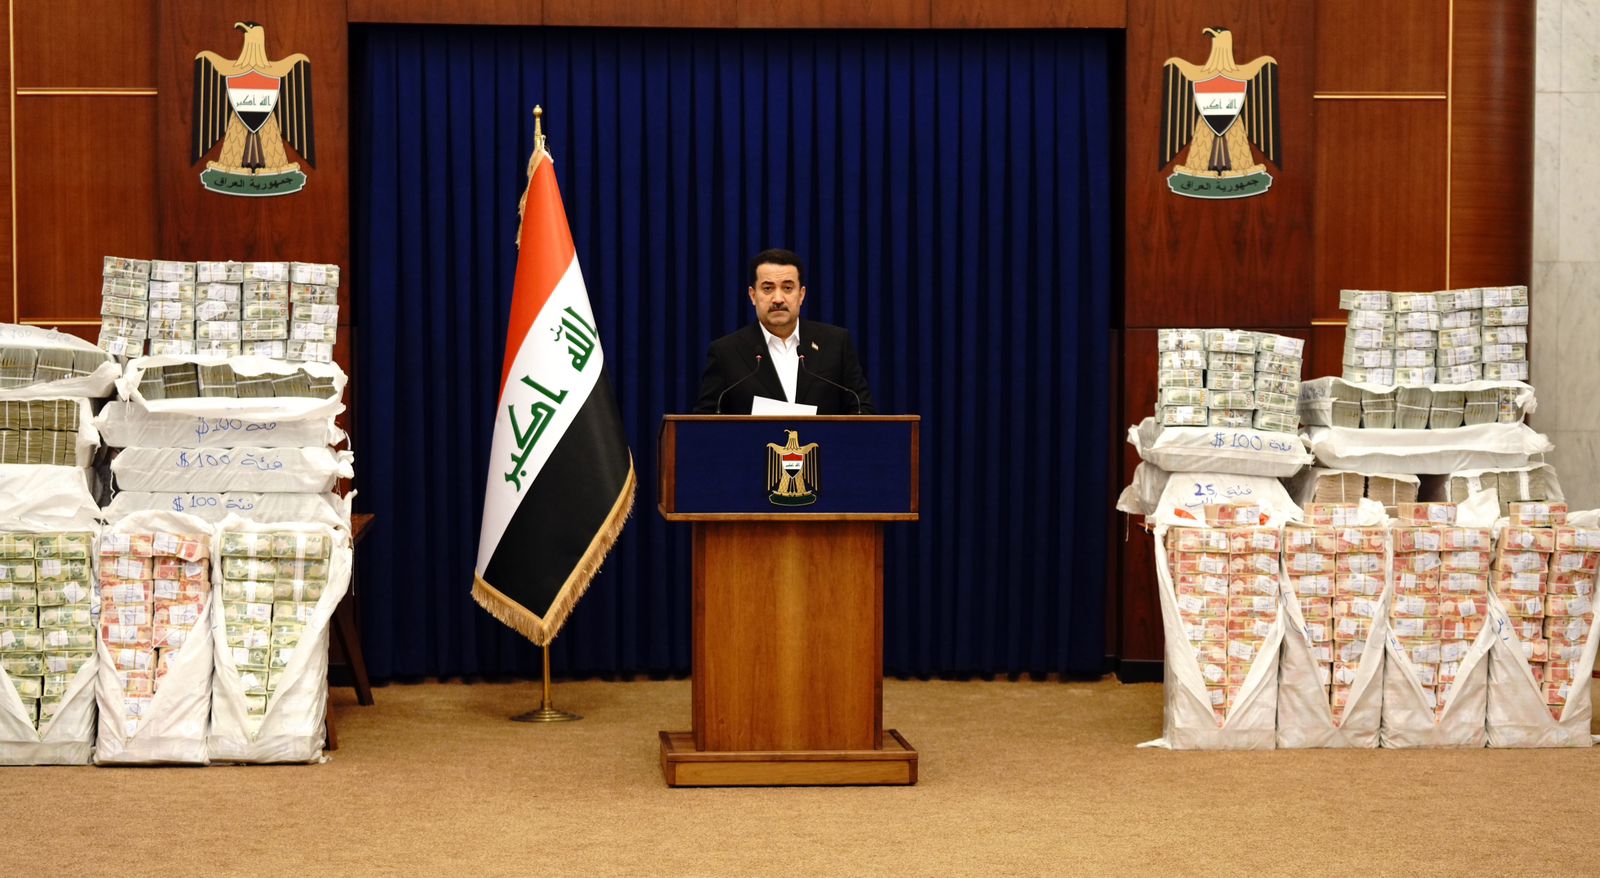 Iraqi Prime Minister pledges to hold accountable those involved in "theft of the century" case